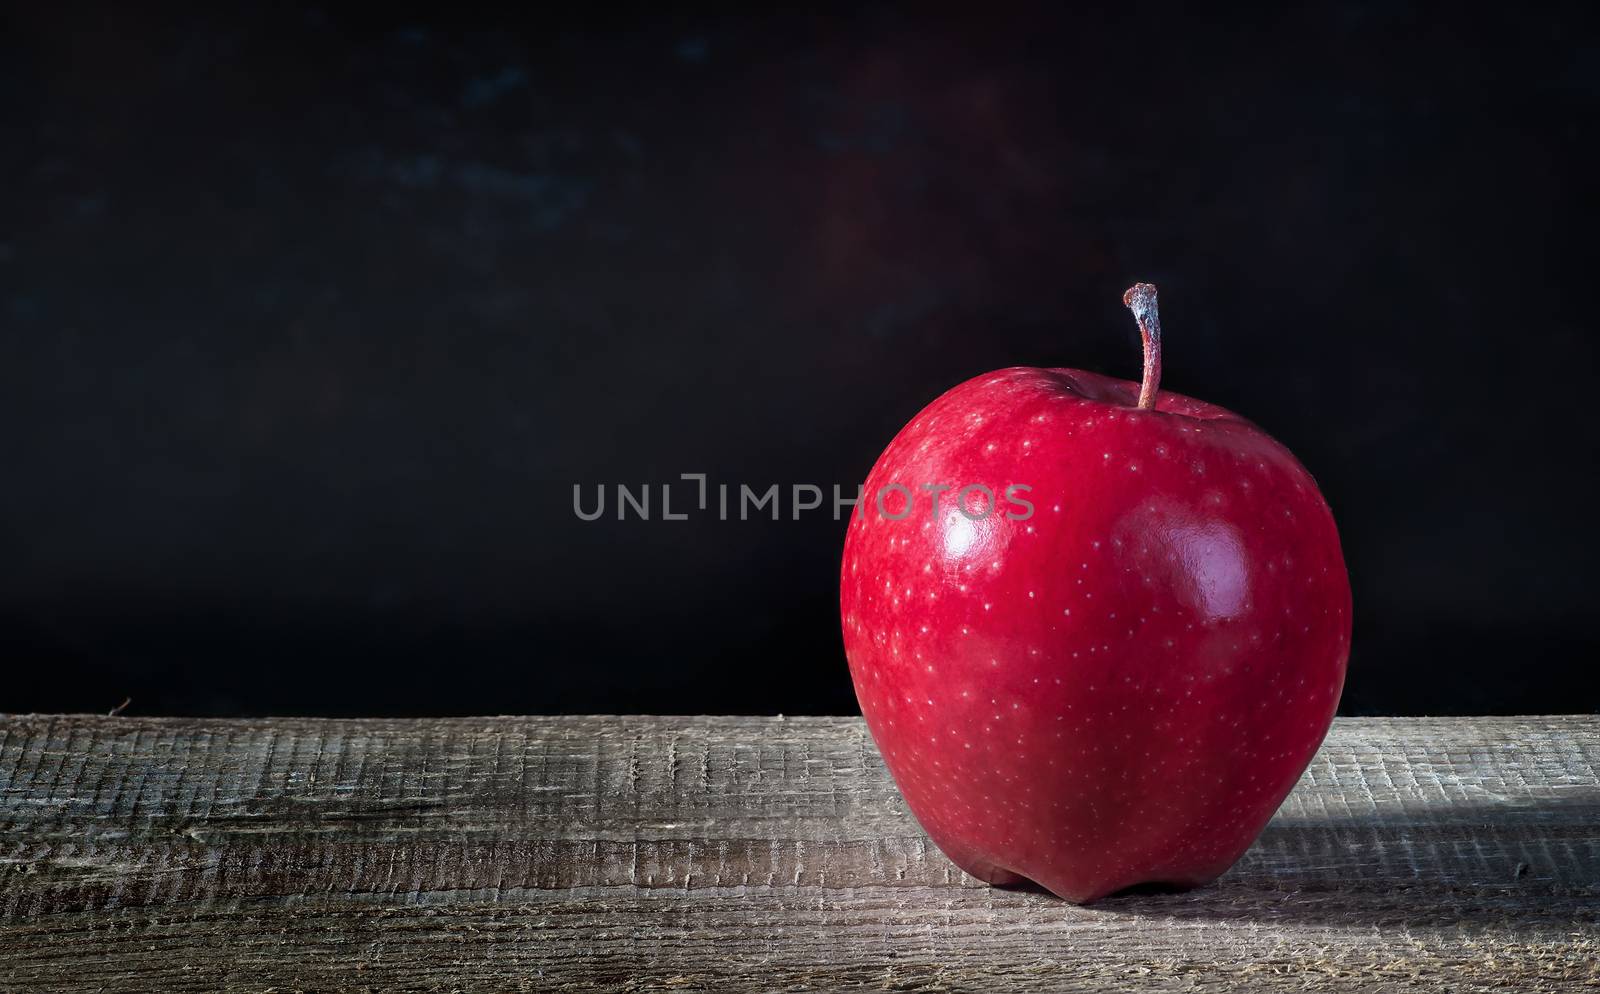 Single apple on a wooden table. Blurred dark background.